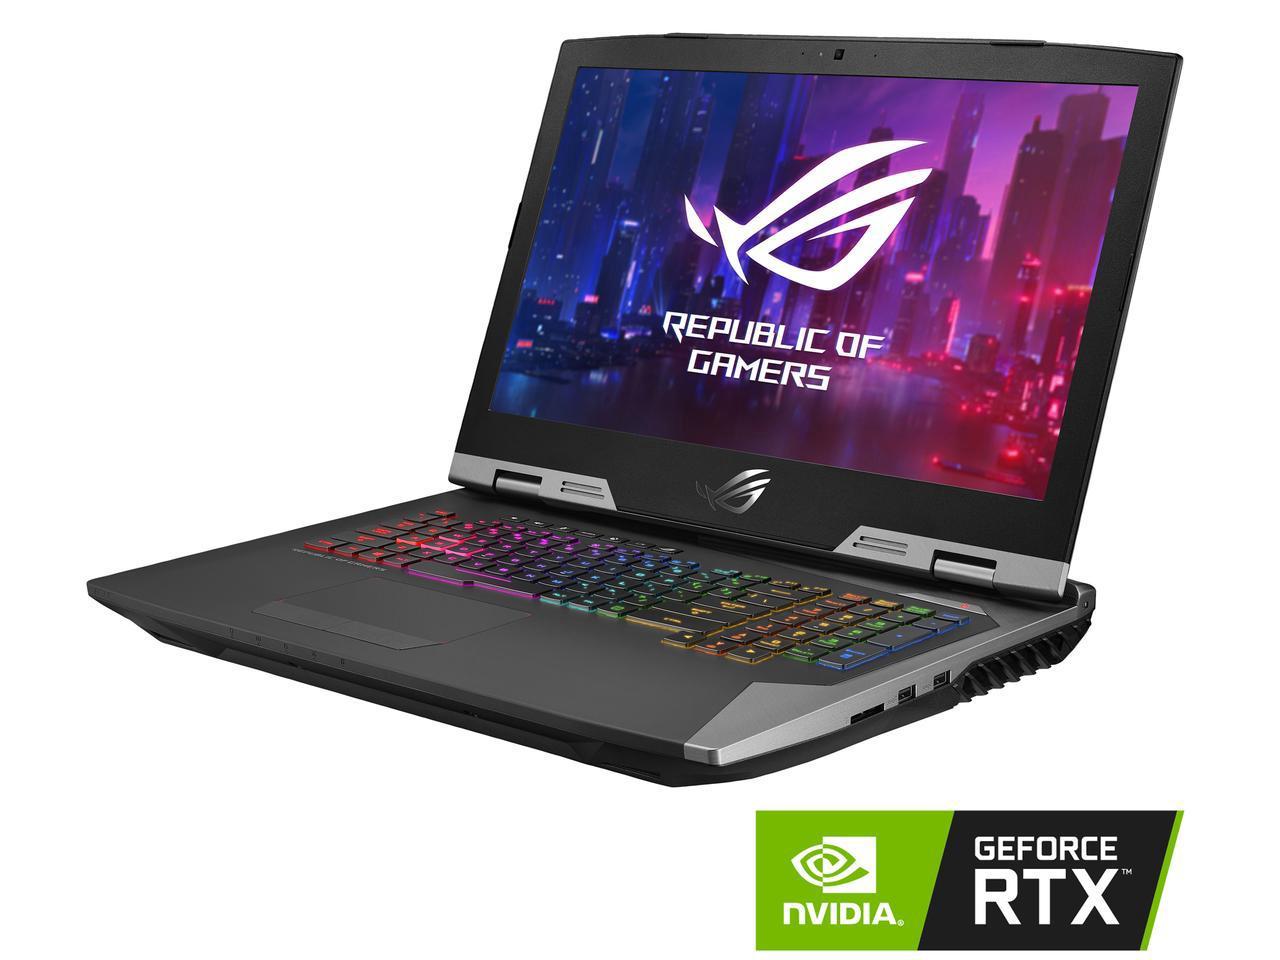 The GeForce RTX laptops are now shipping starting at $1500 USD News